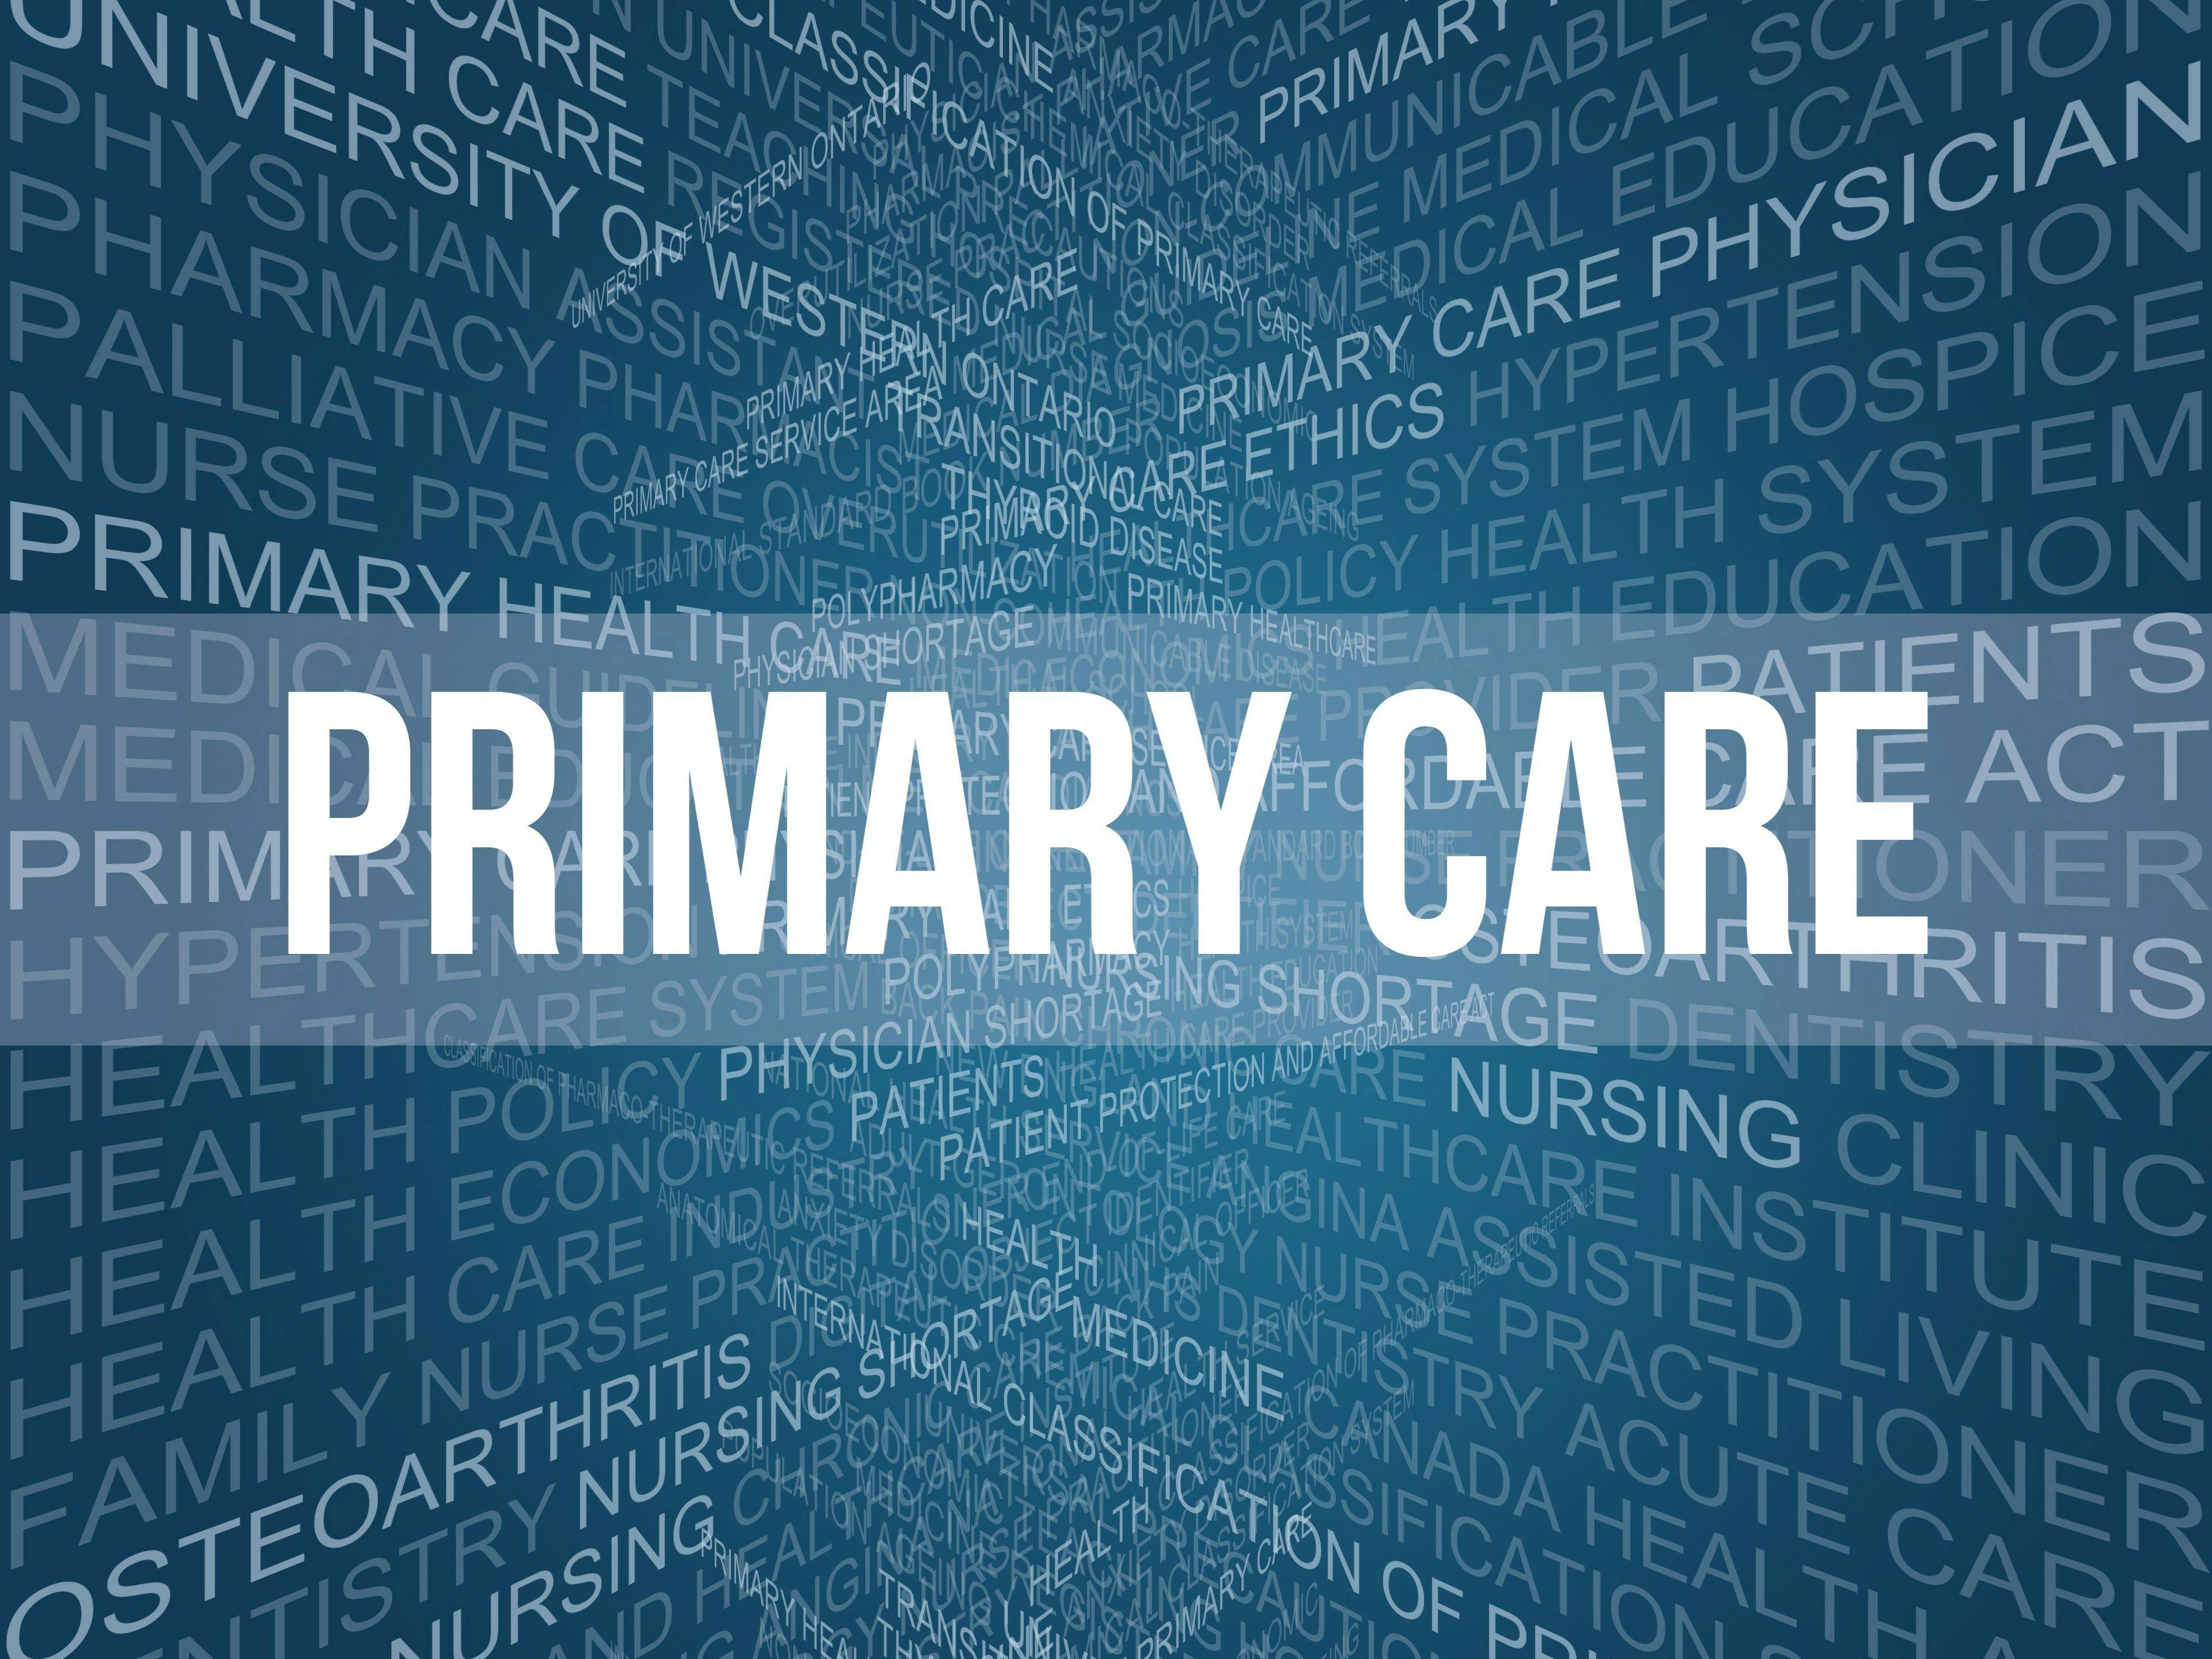 Low pay hurts primary care: ©crazycloud - stock.adobe.com